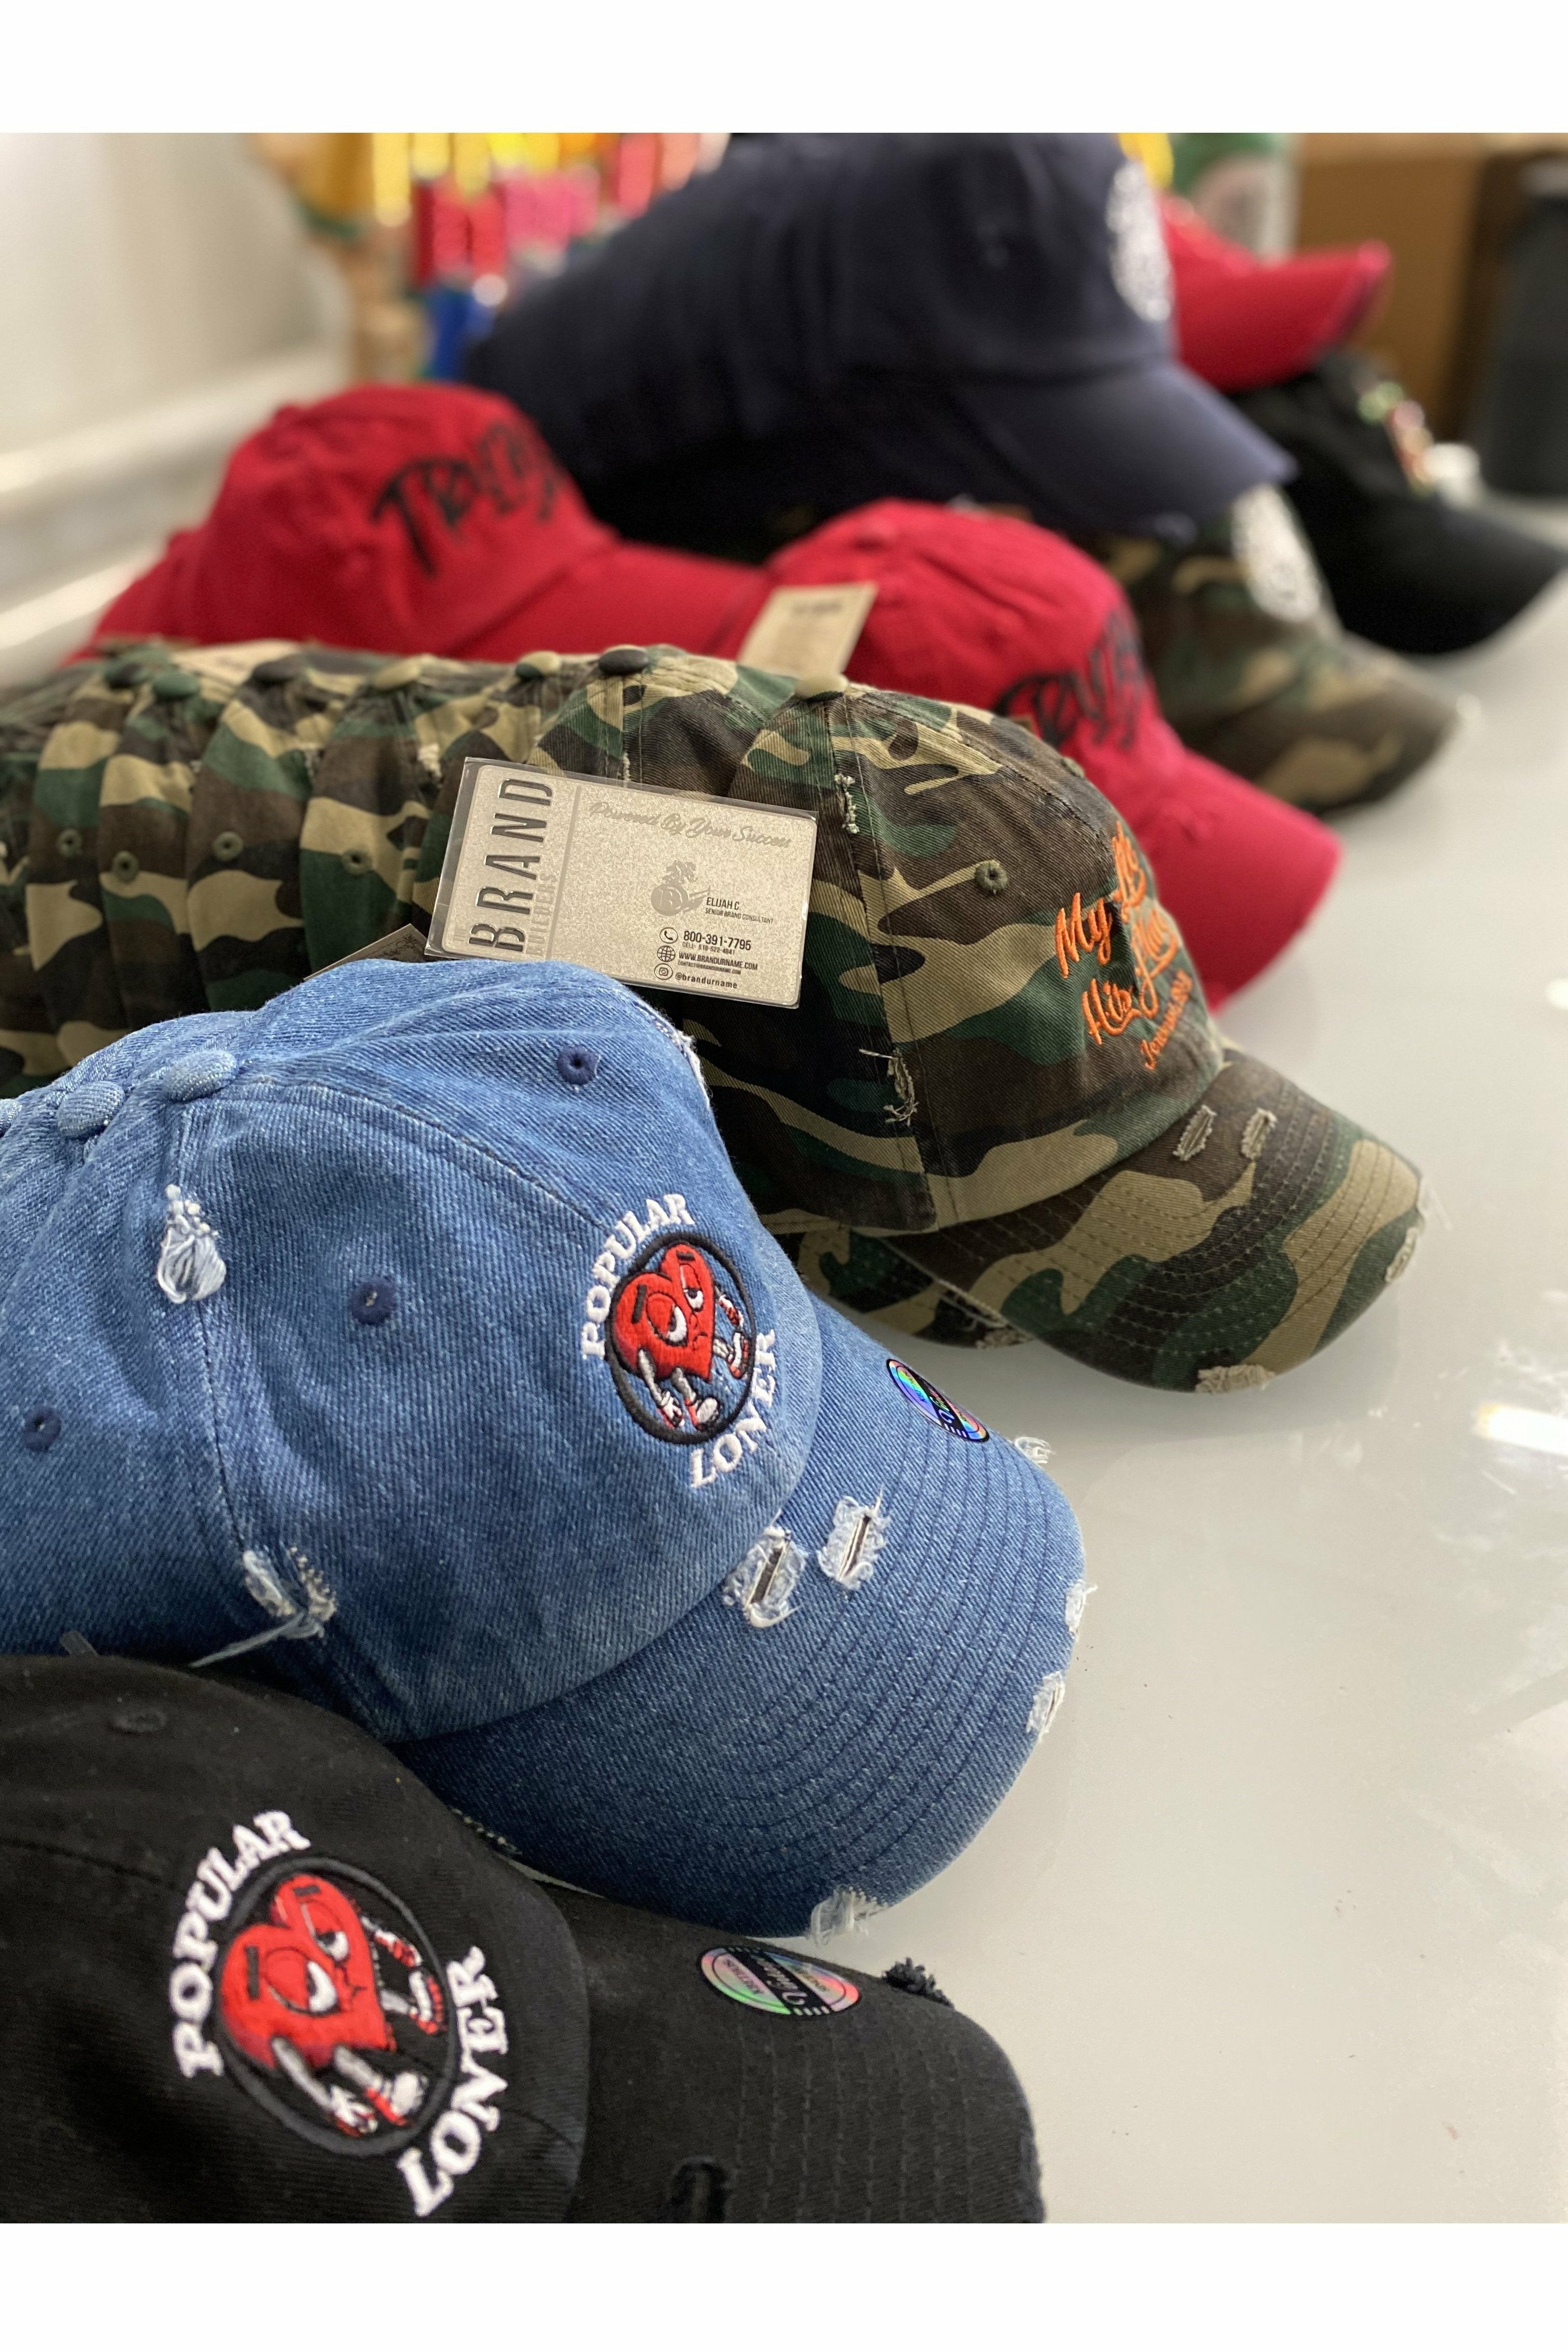 Custom hats Classic Caps & Dad Hat Packages (Embroidered) - BRNDURNAME